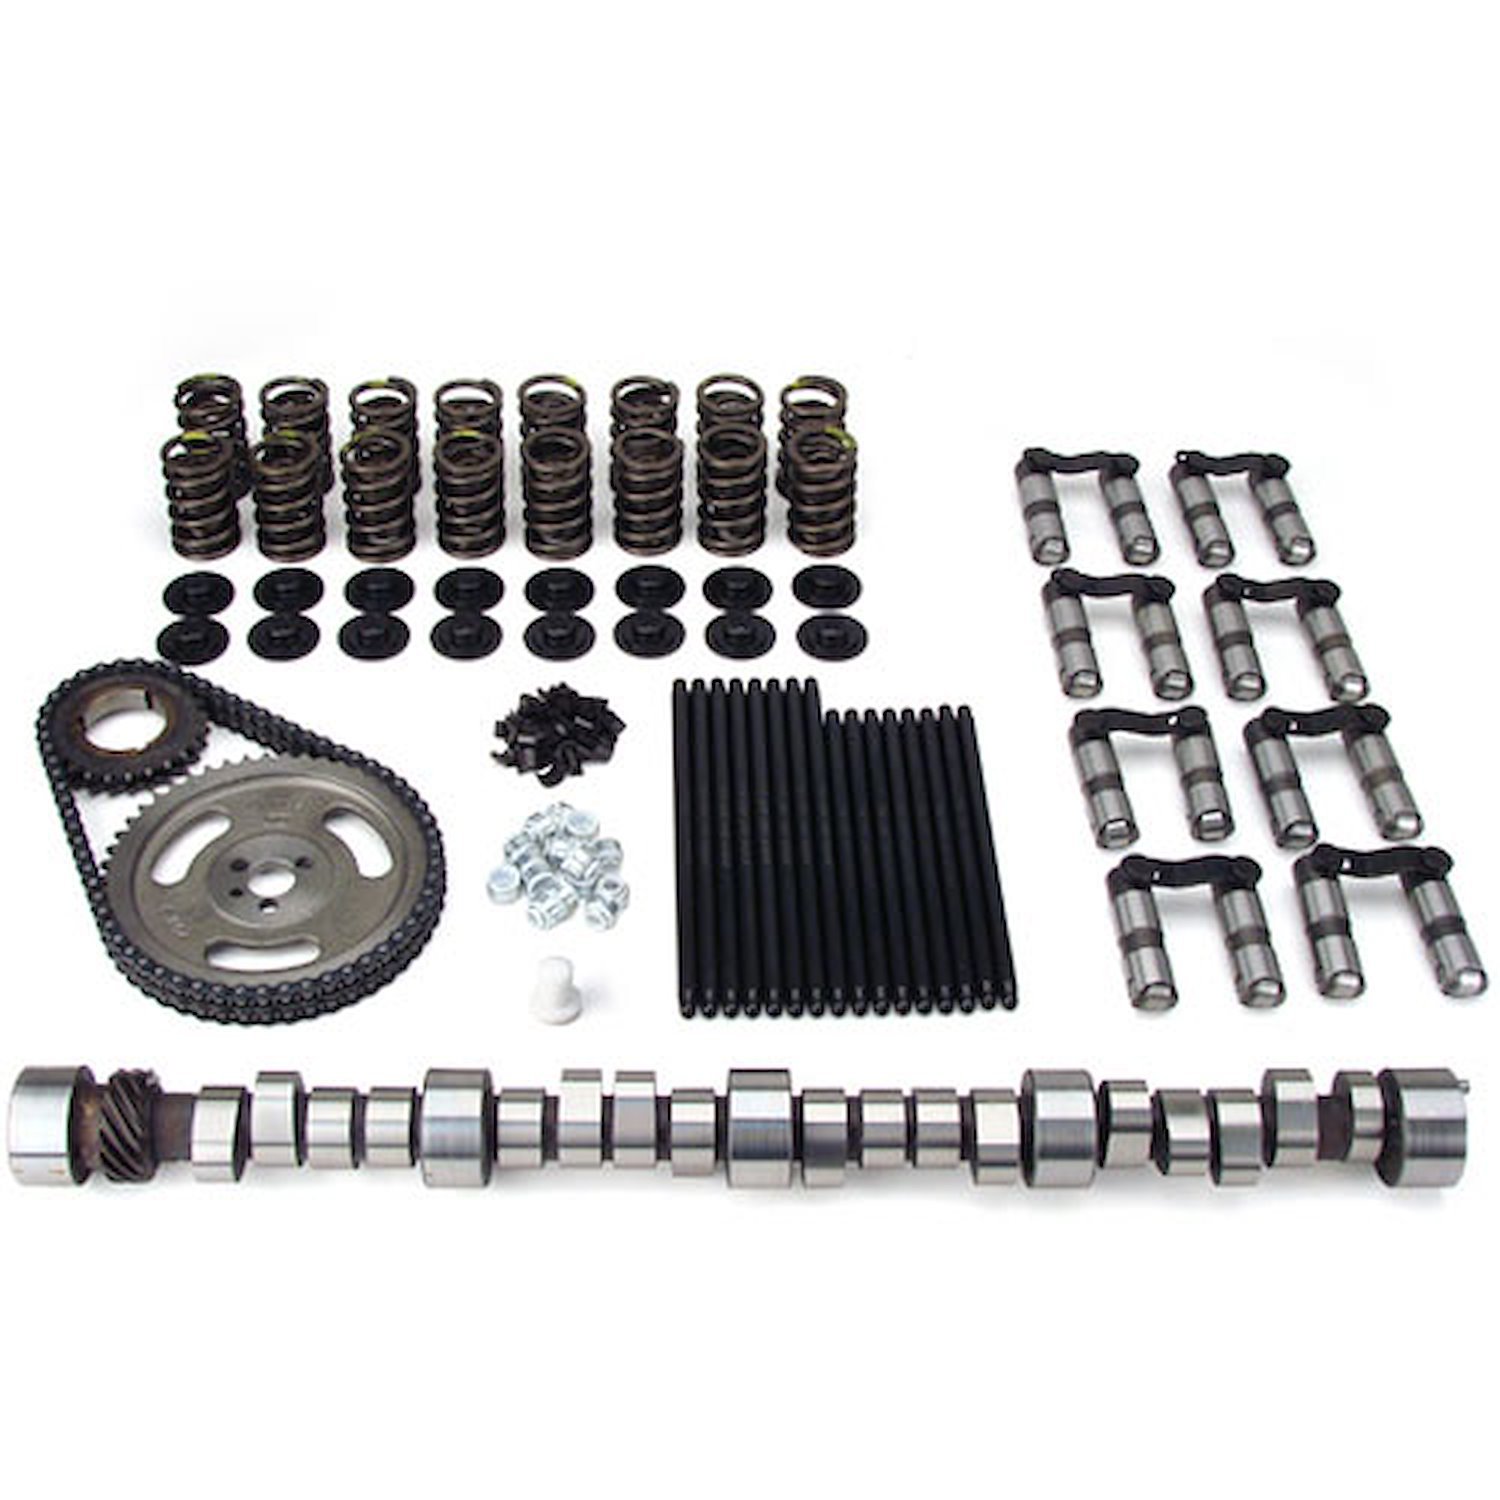 Magnum Hydraulic Roller Camshaft Complete Kit Chevy Small Block 305 & 350 Factory Roller Lift: .560"/.560"